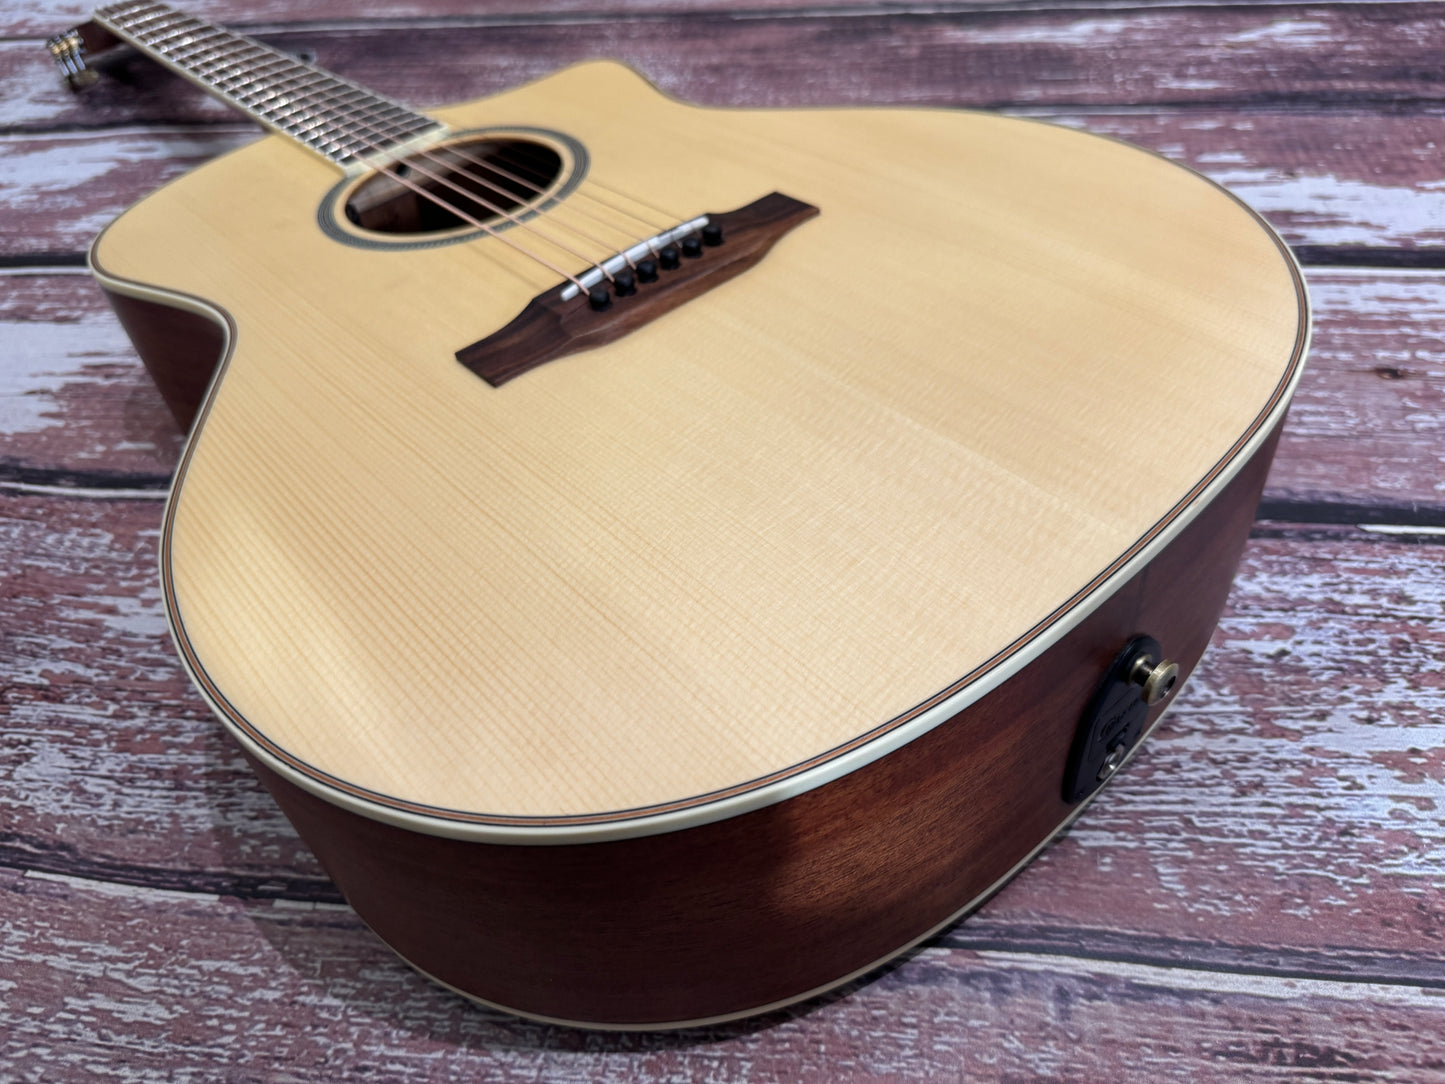 Crafter Mind series G-16 CE Pro Electro Acoustic